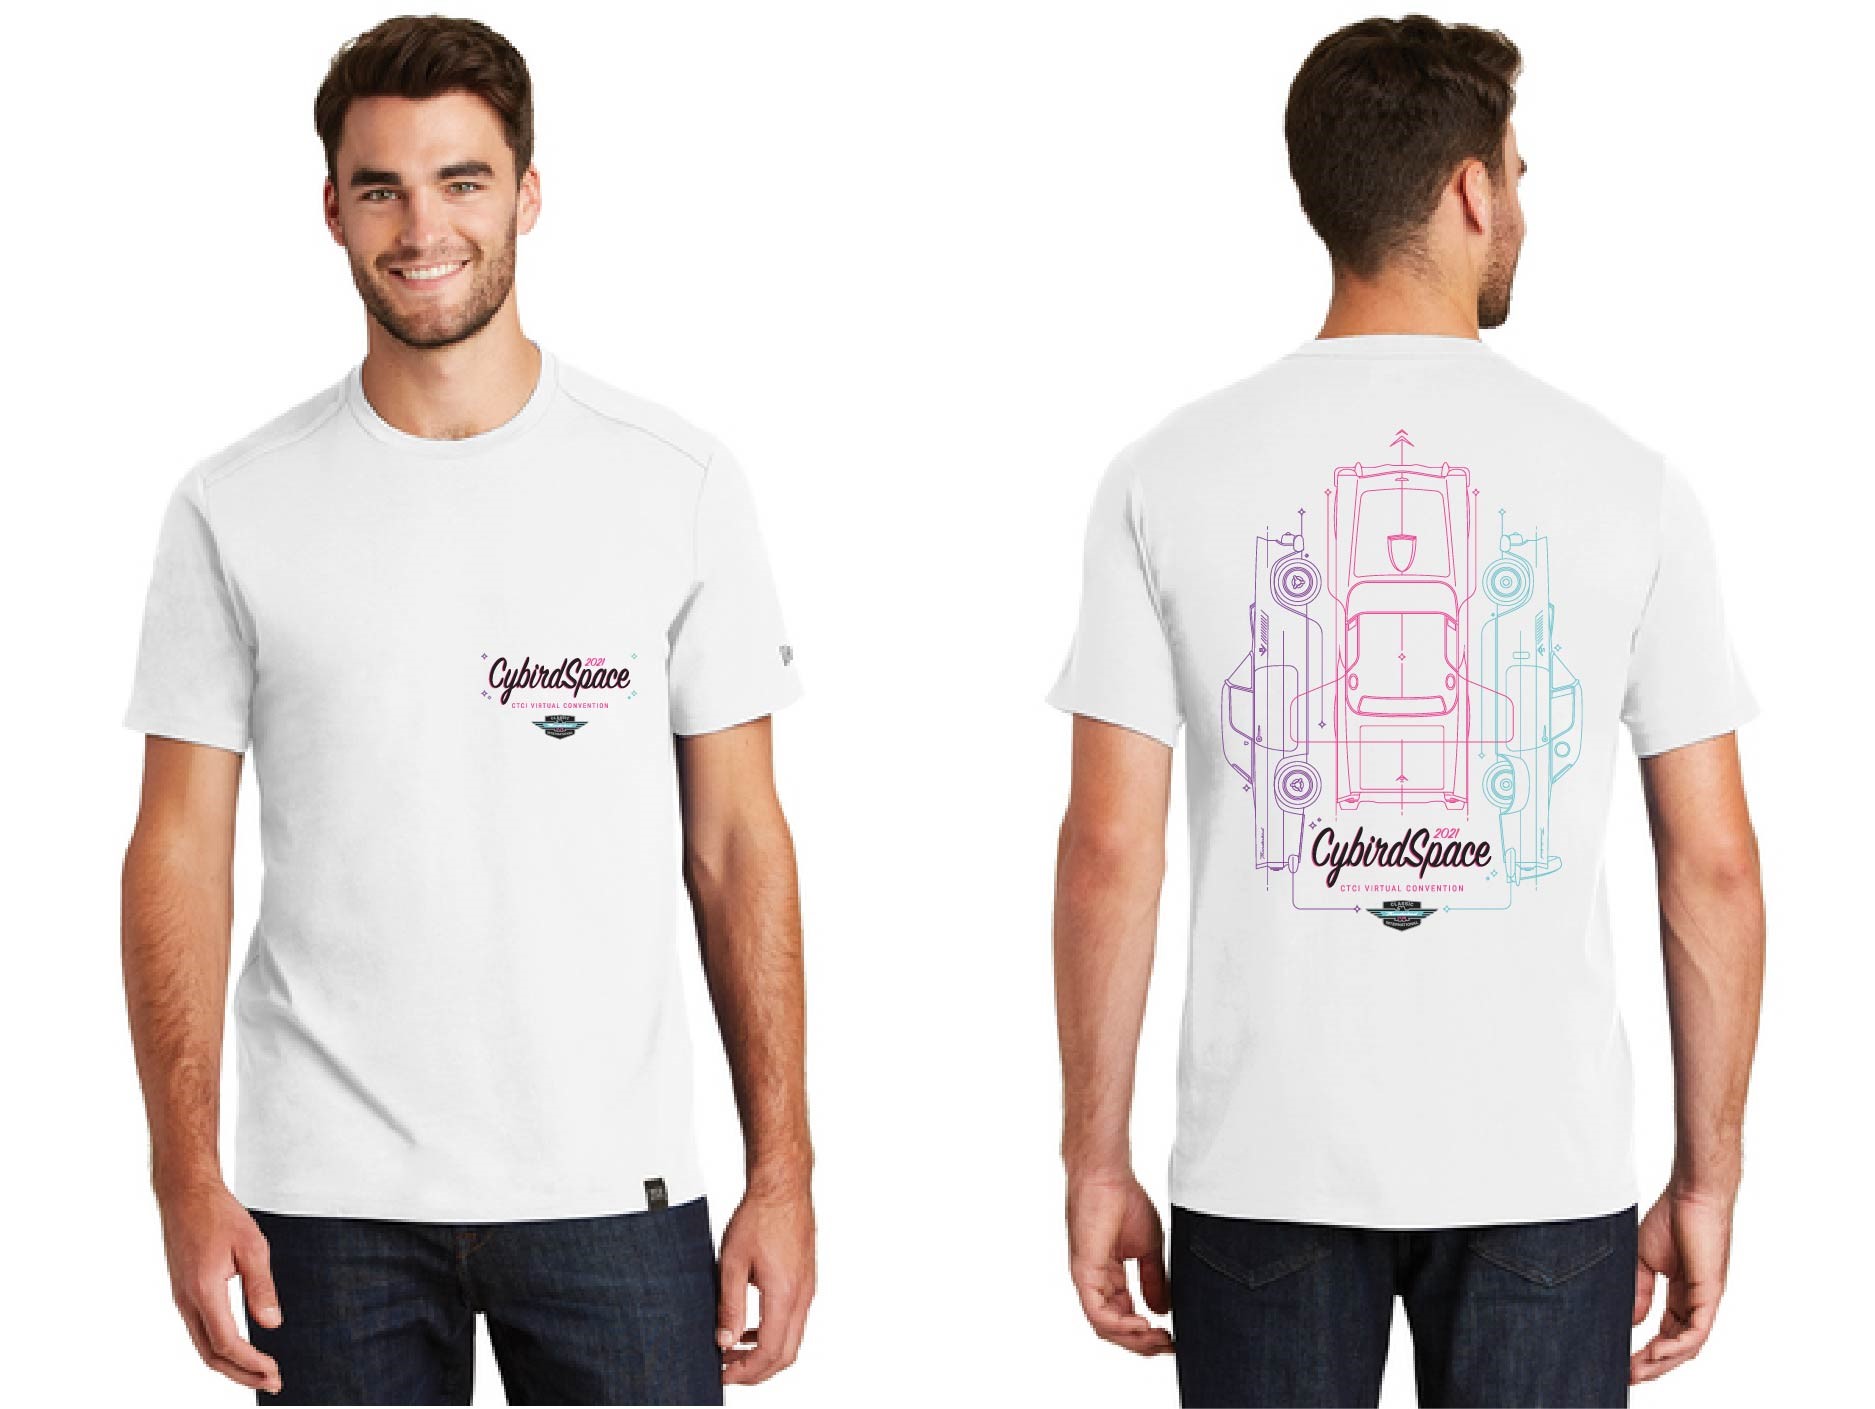 Virtual Convention T-Shirt Available!